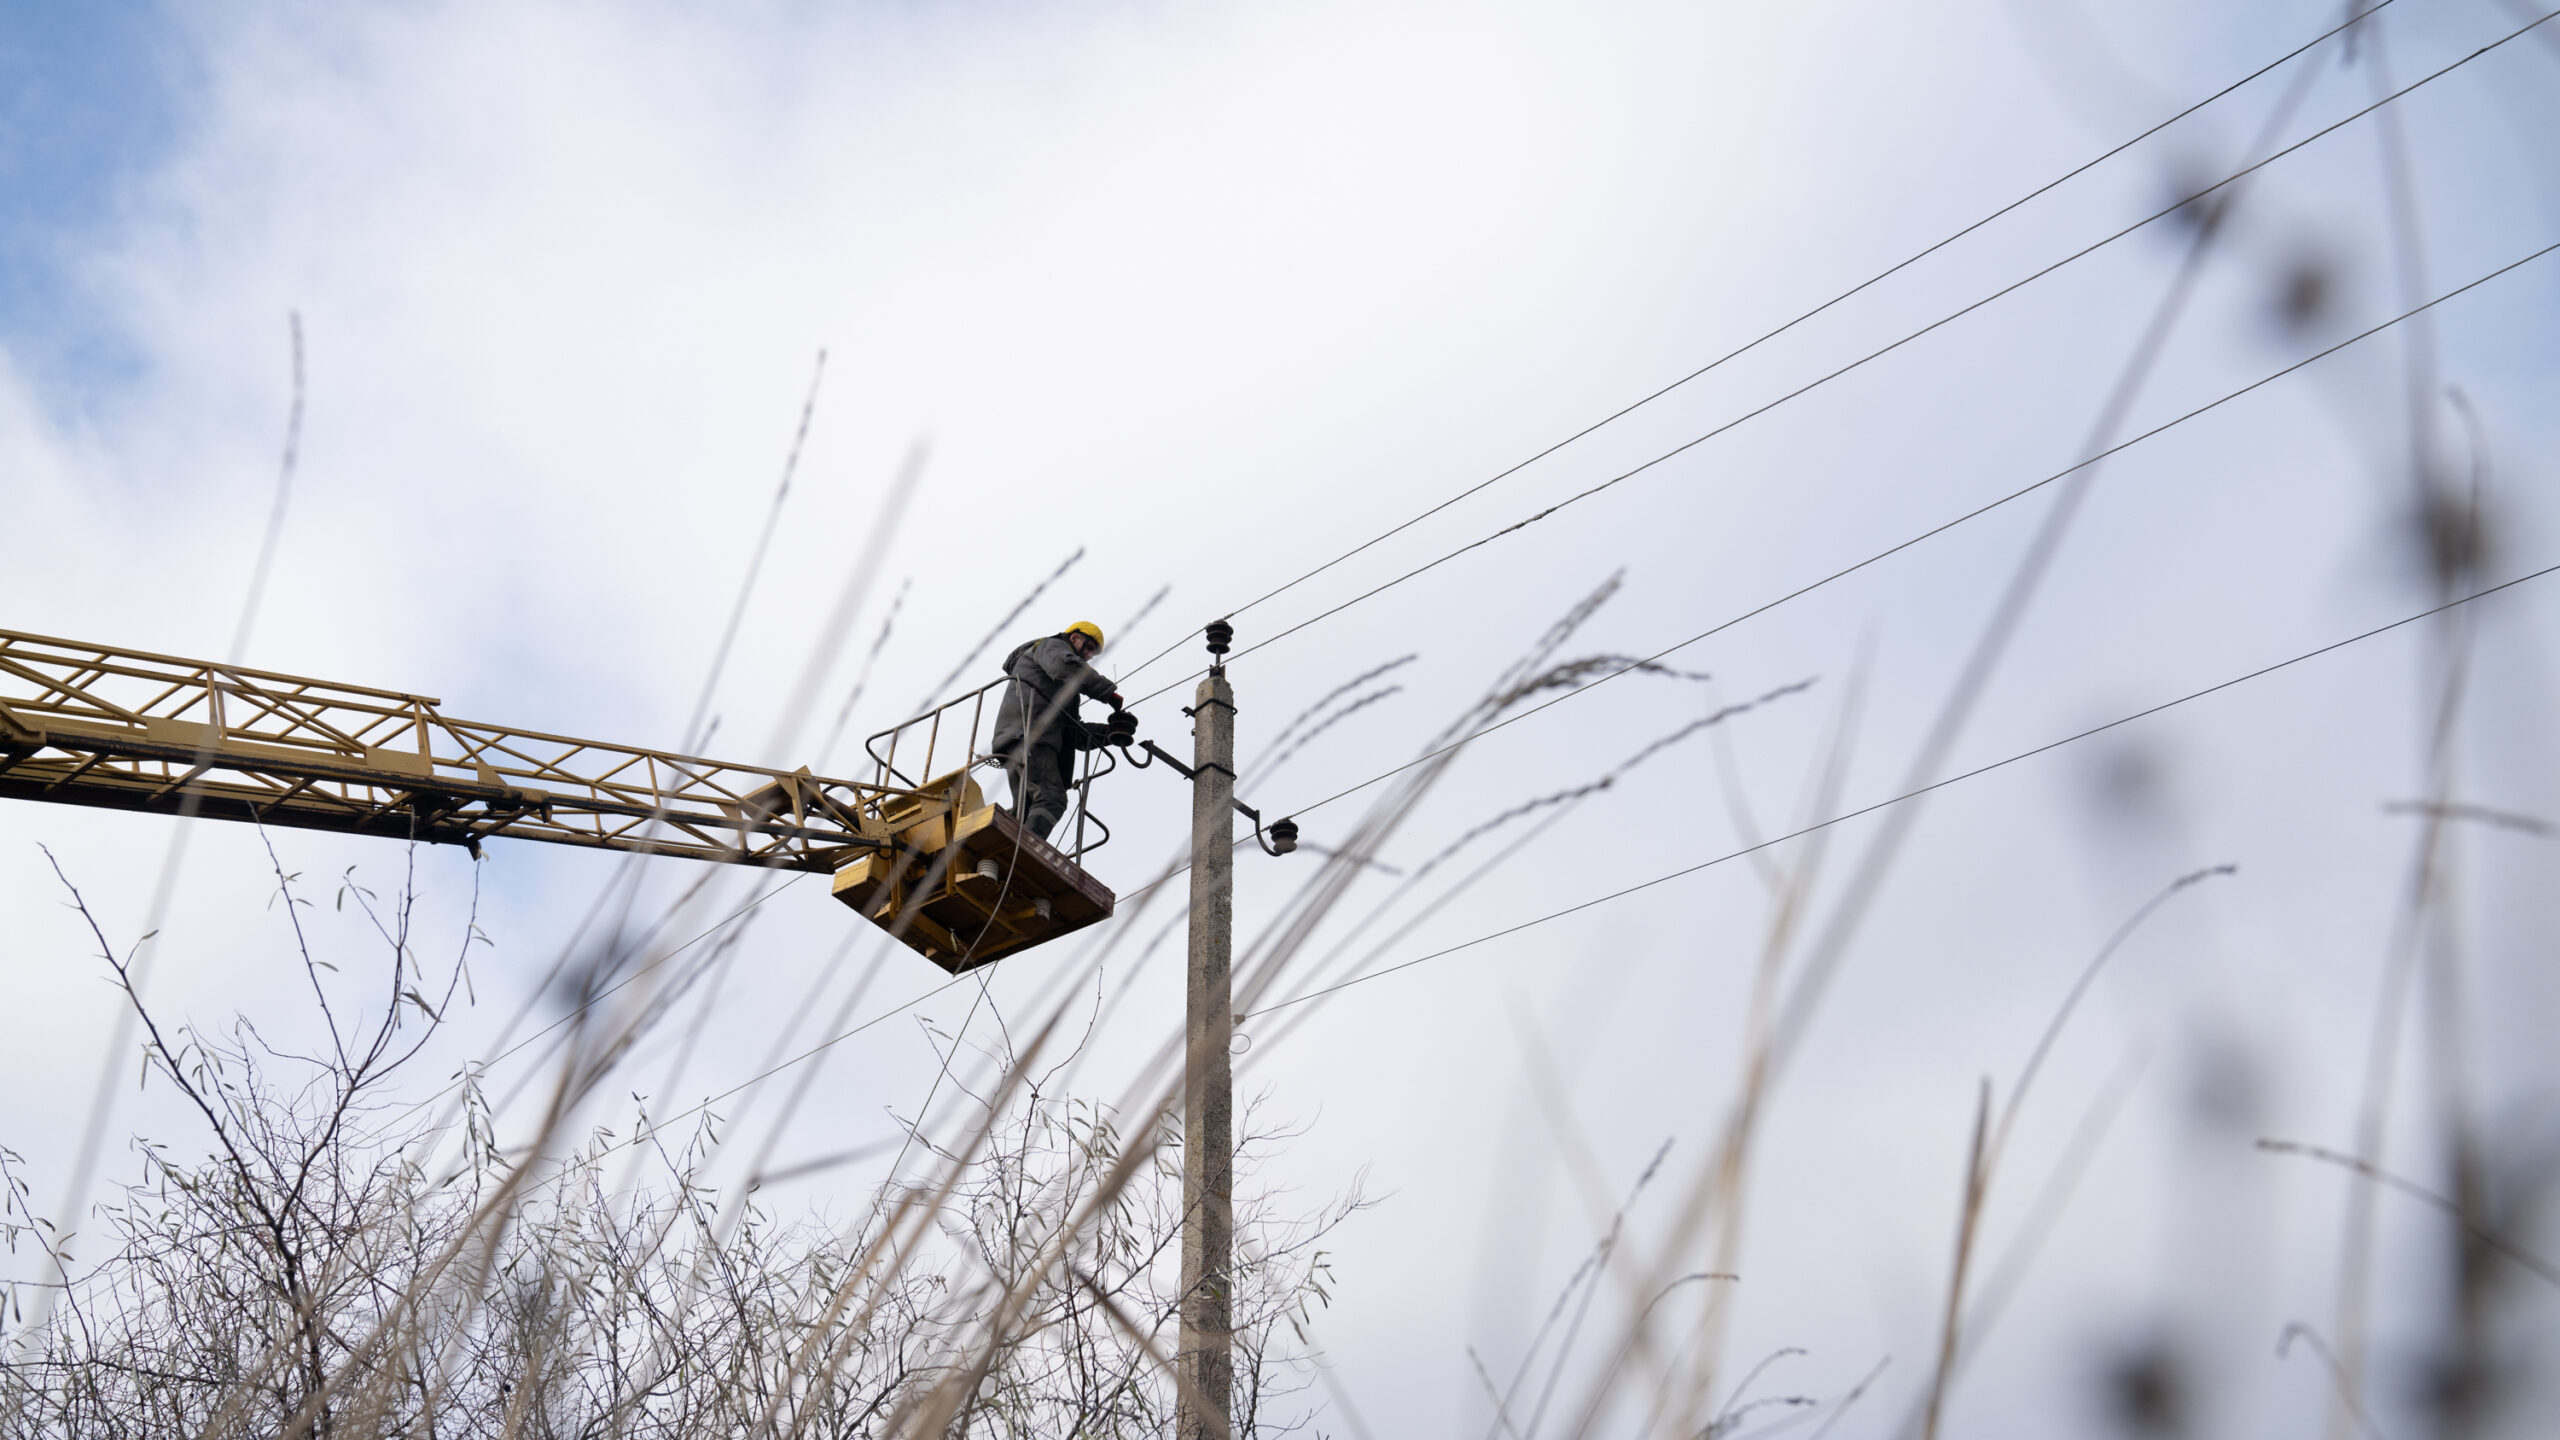 Utility workers north of Lyman, Ukraine, work on restringing electrical poles in an effort to brace the country's energy